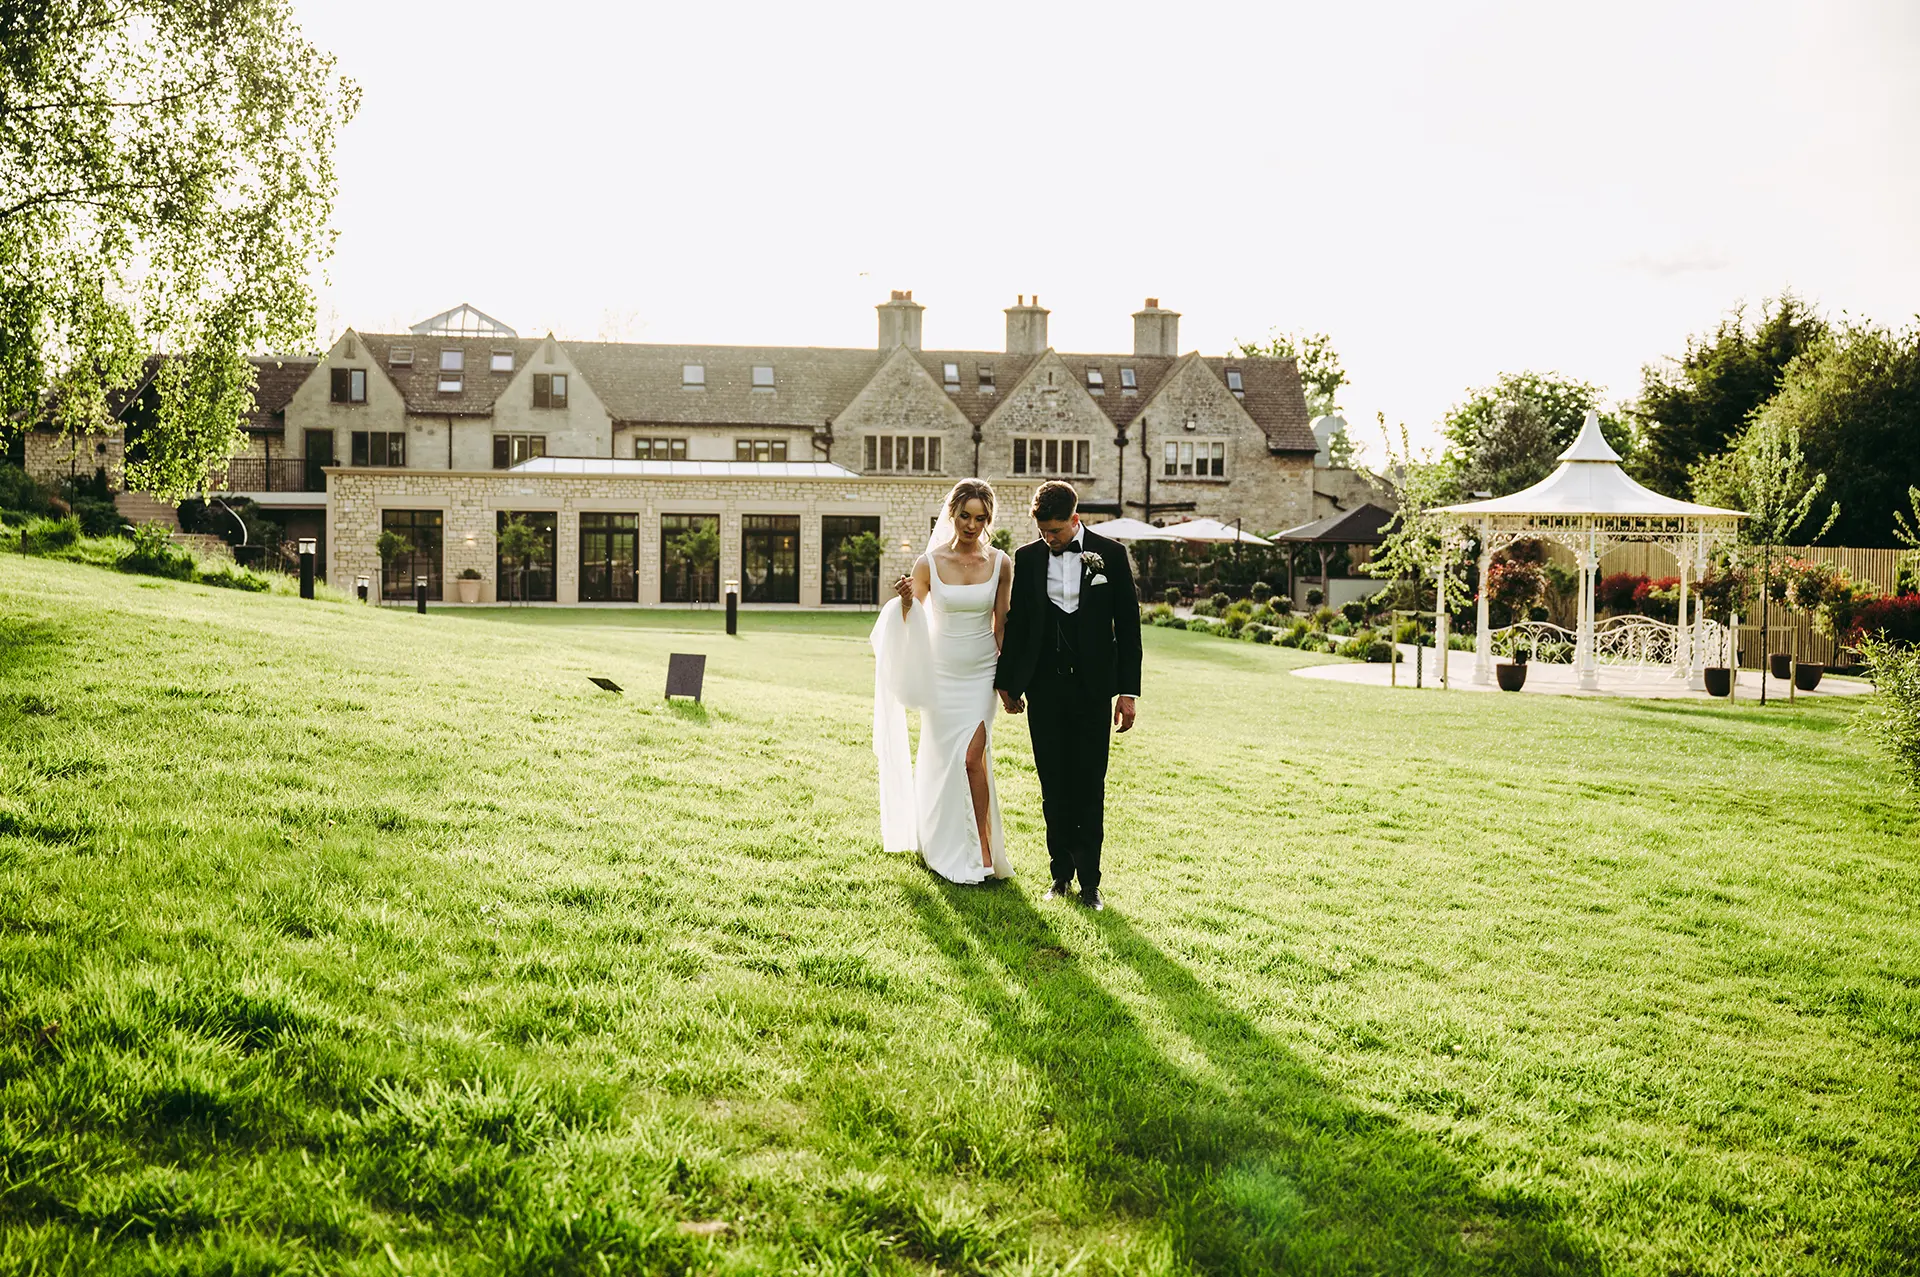 The Pear Tree Purton bride and groom grounds